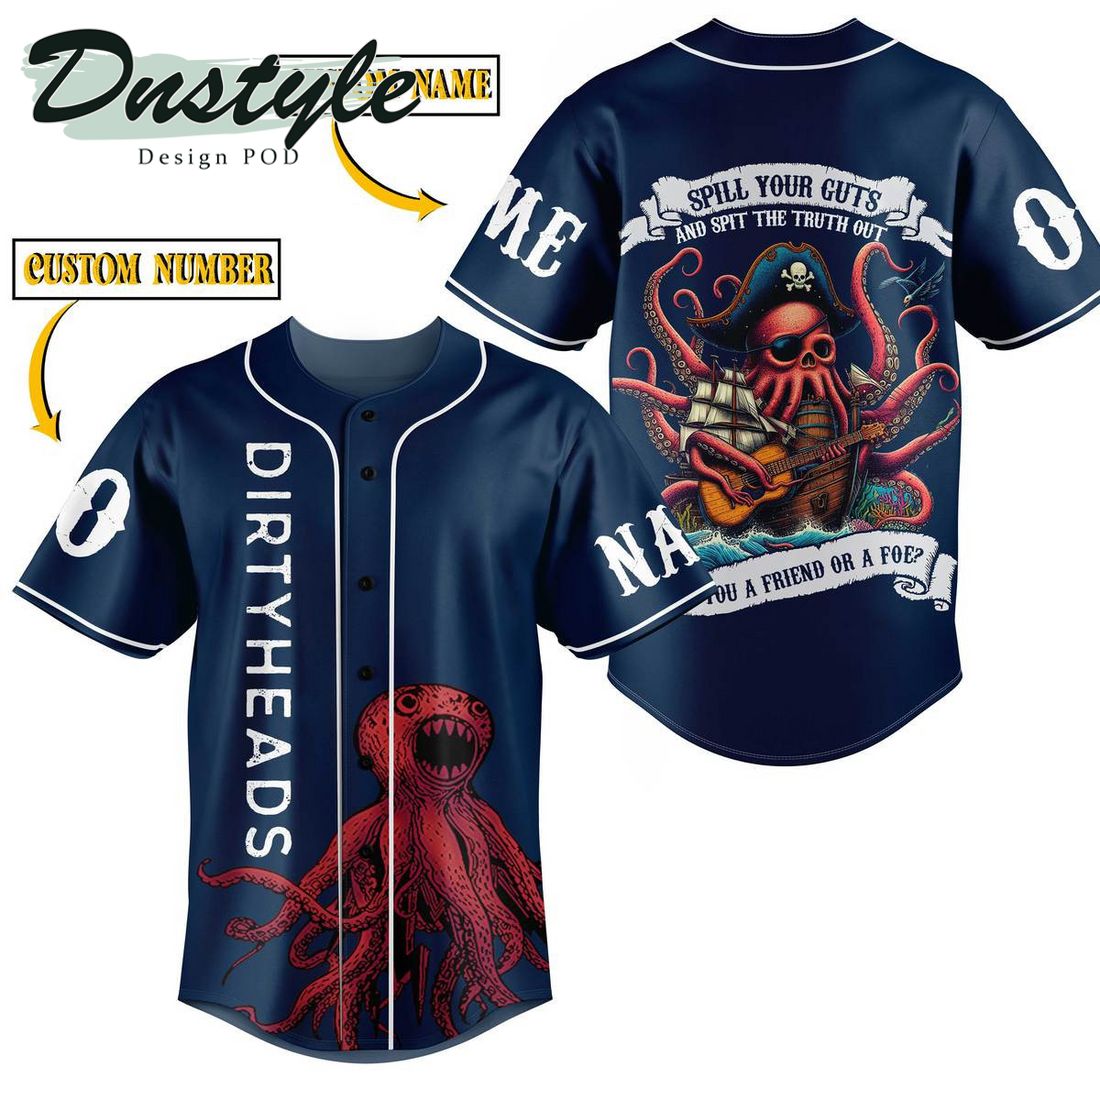 Dirty Heads Spill Your Cuts And Spit The Truth Out Personalized Baseball Jersey